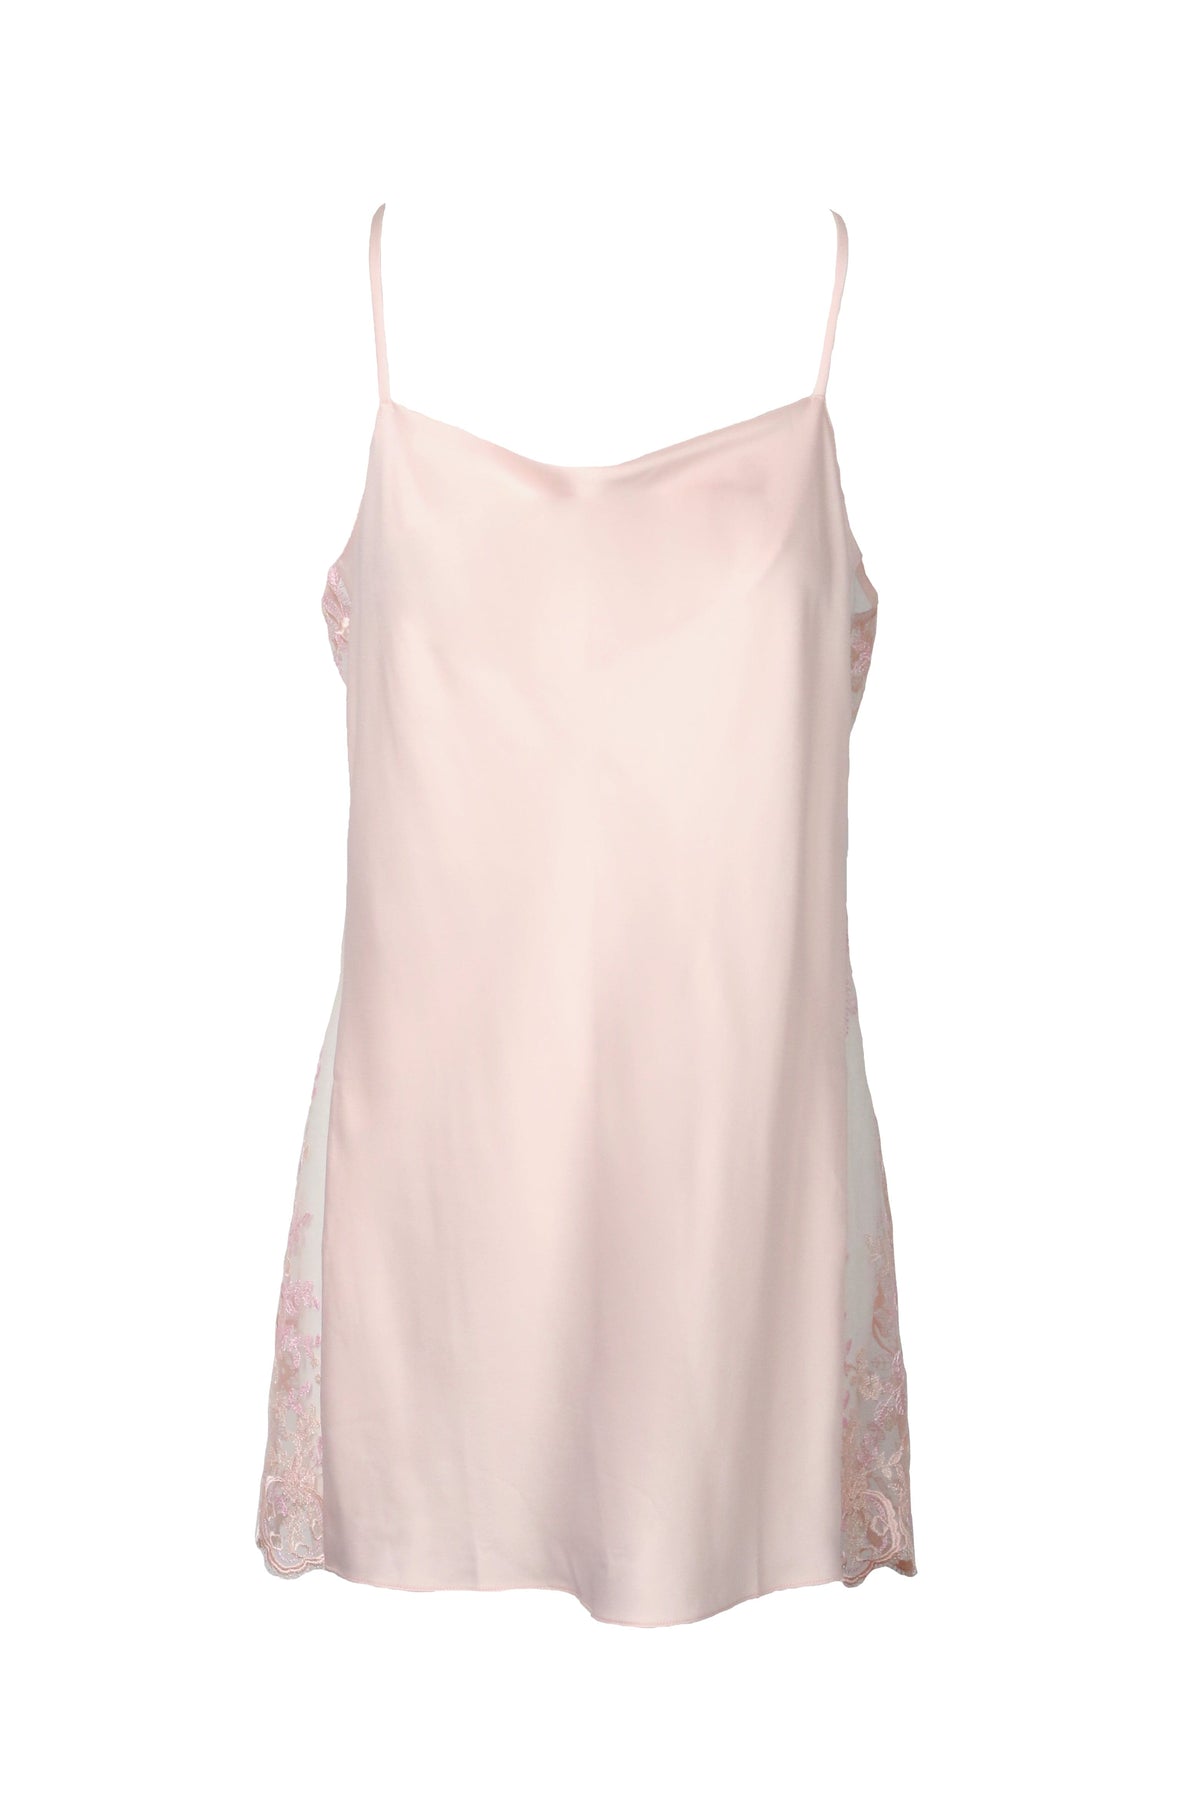 Rya Collection Chemise Petal Pink / XS Darling Chemise - Petal Pink